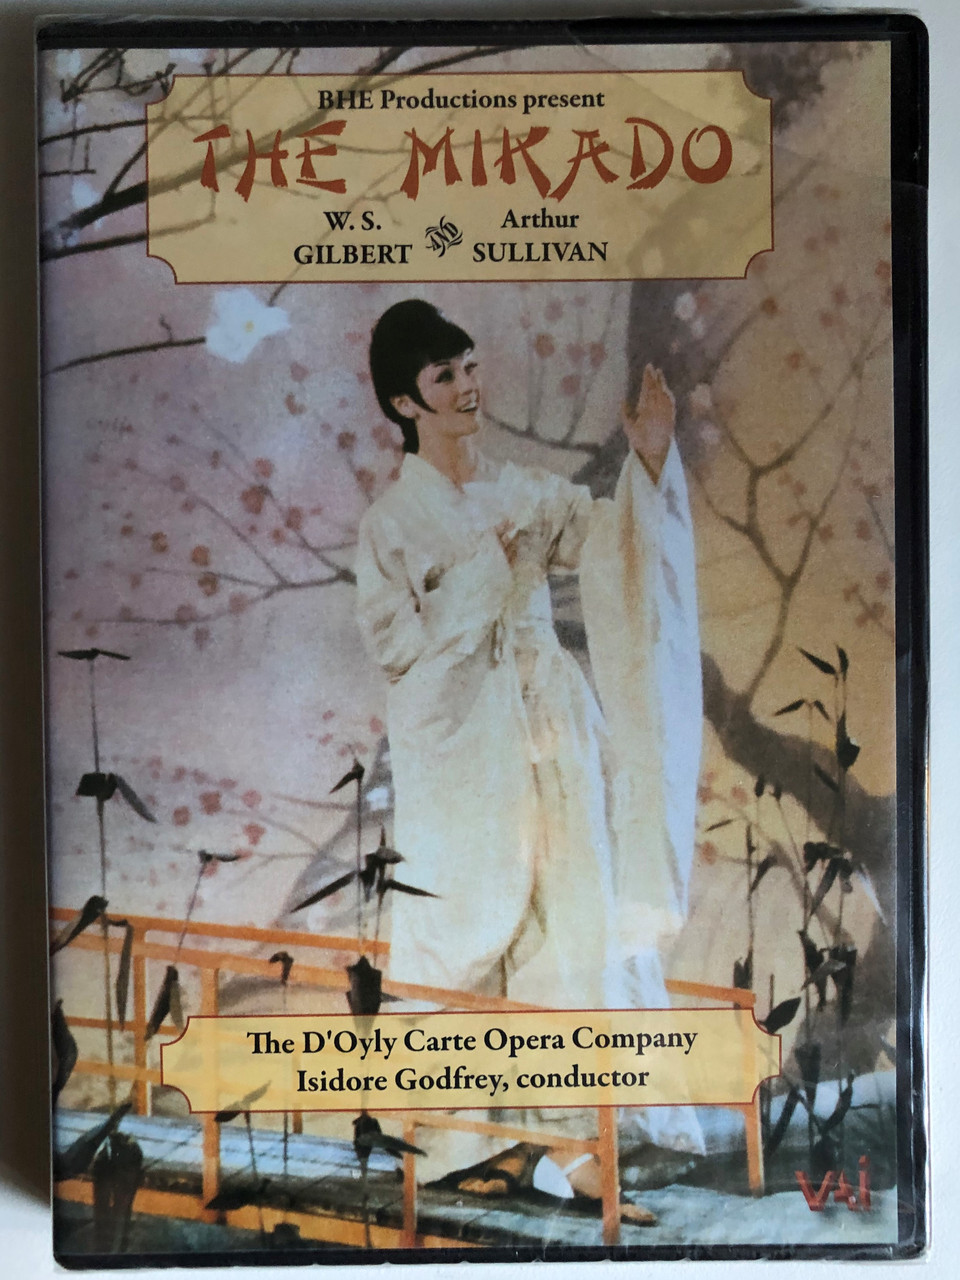 The_Mikado_by_W._S._Gilbert_and_Arthur_Sullivan_DOyly_Carte_Opera_Companys_production_The_City_of_Birmingham_Symphony_Orchestra_Isidore_Godfrey_conductor_BHE_Productions___45416.1691992675.1280.1280.JPG (960×1280)